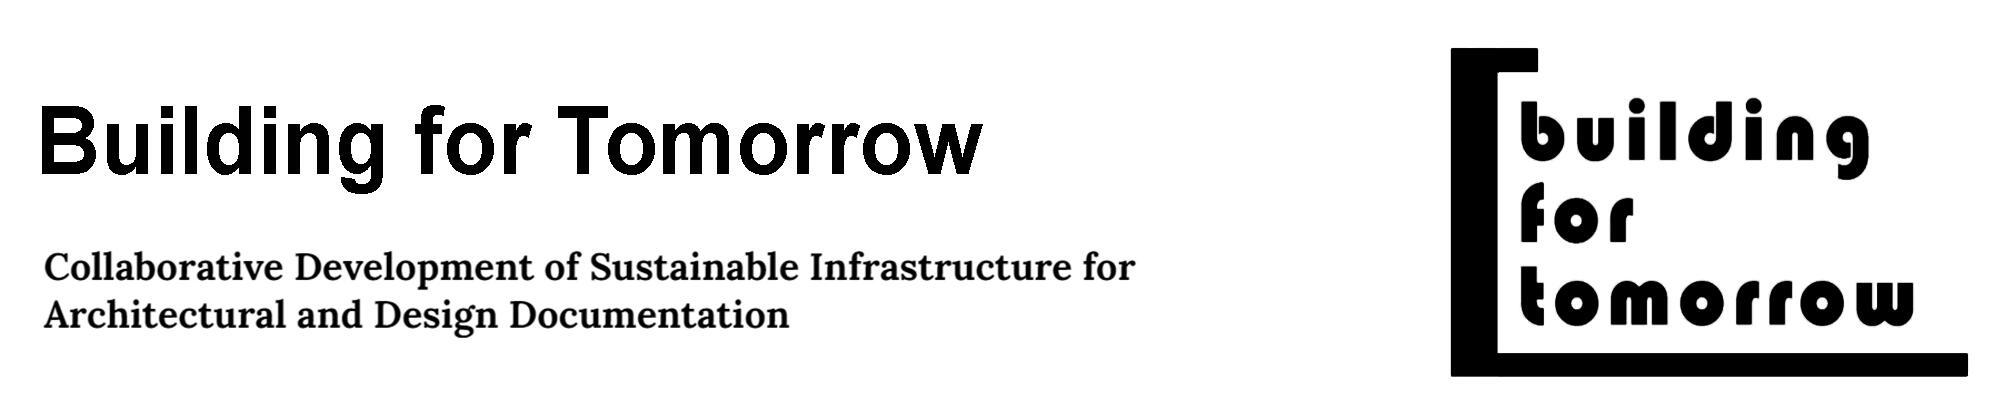 Building for Tomorrow Logo in black and white.